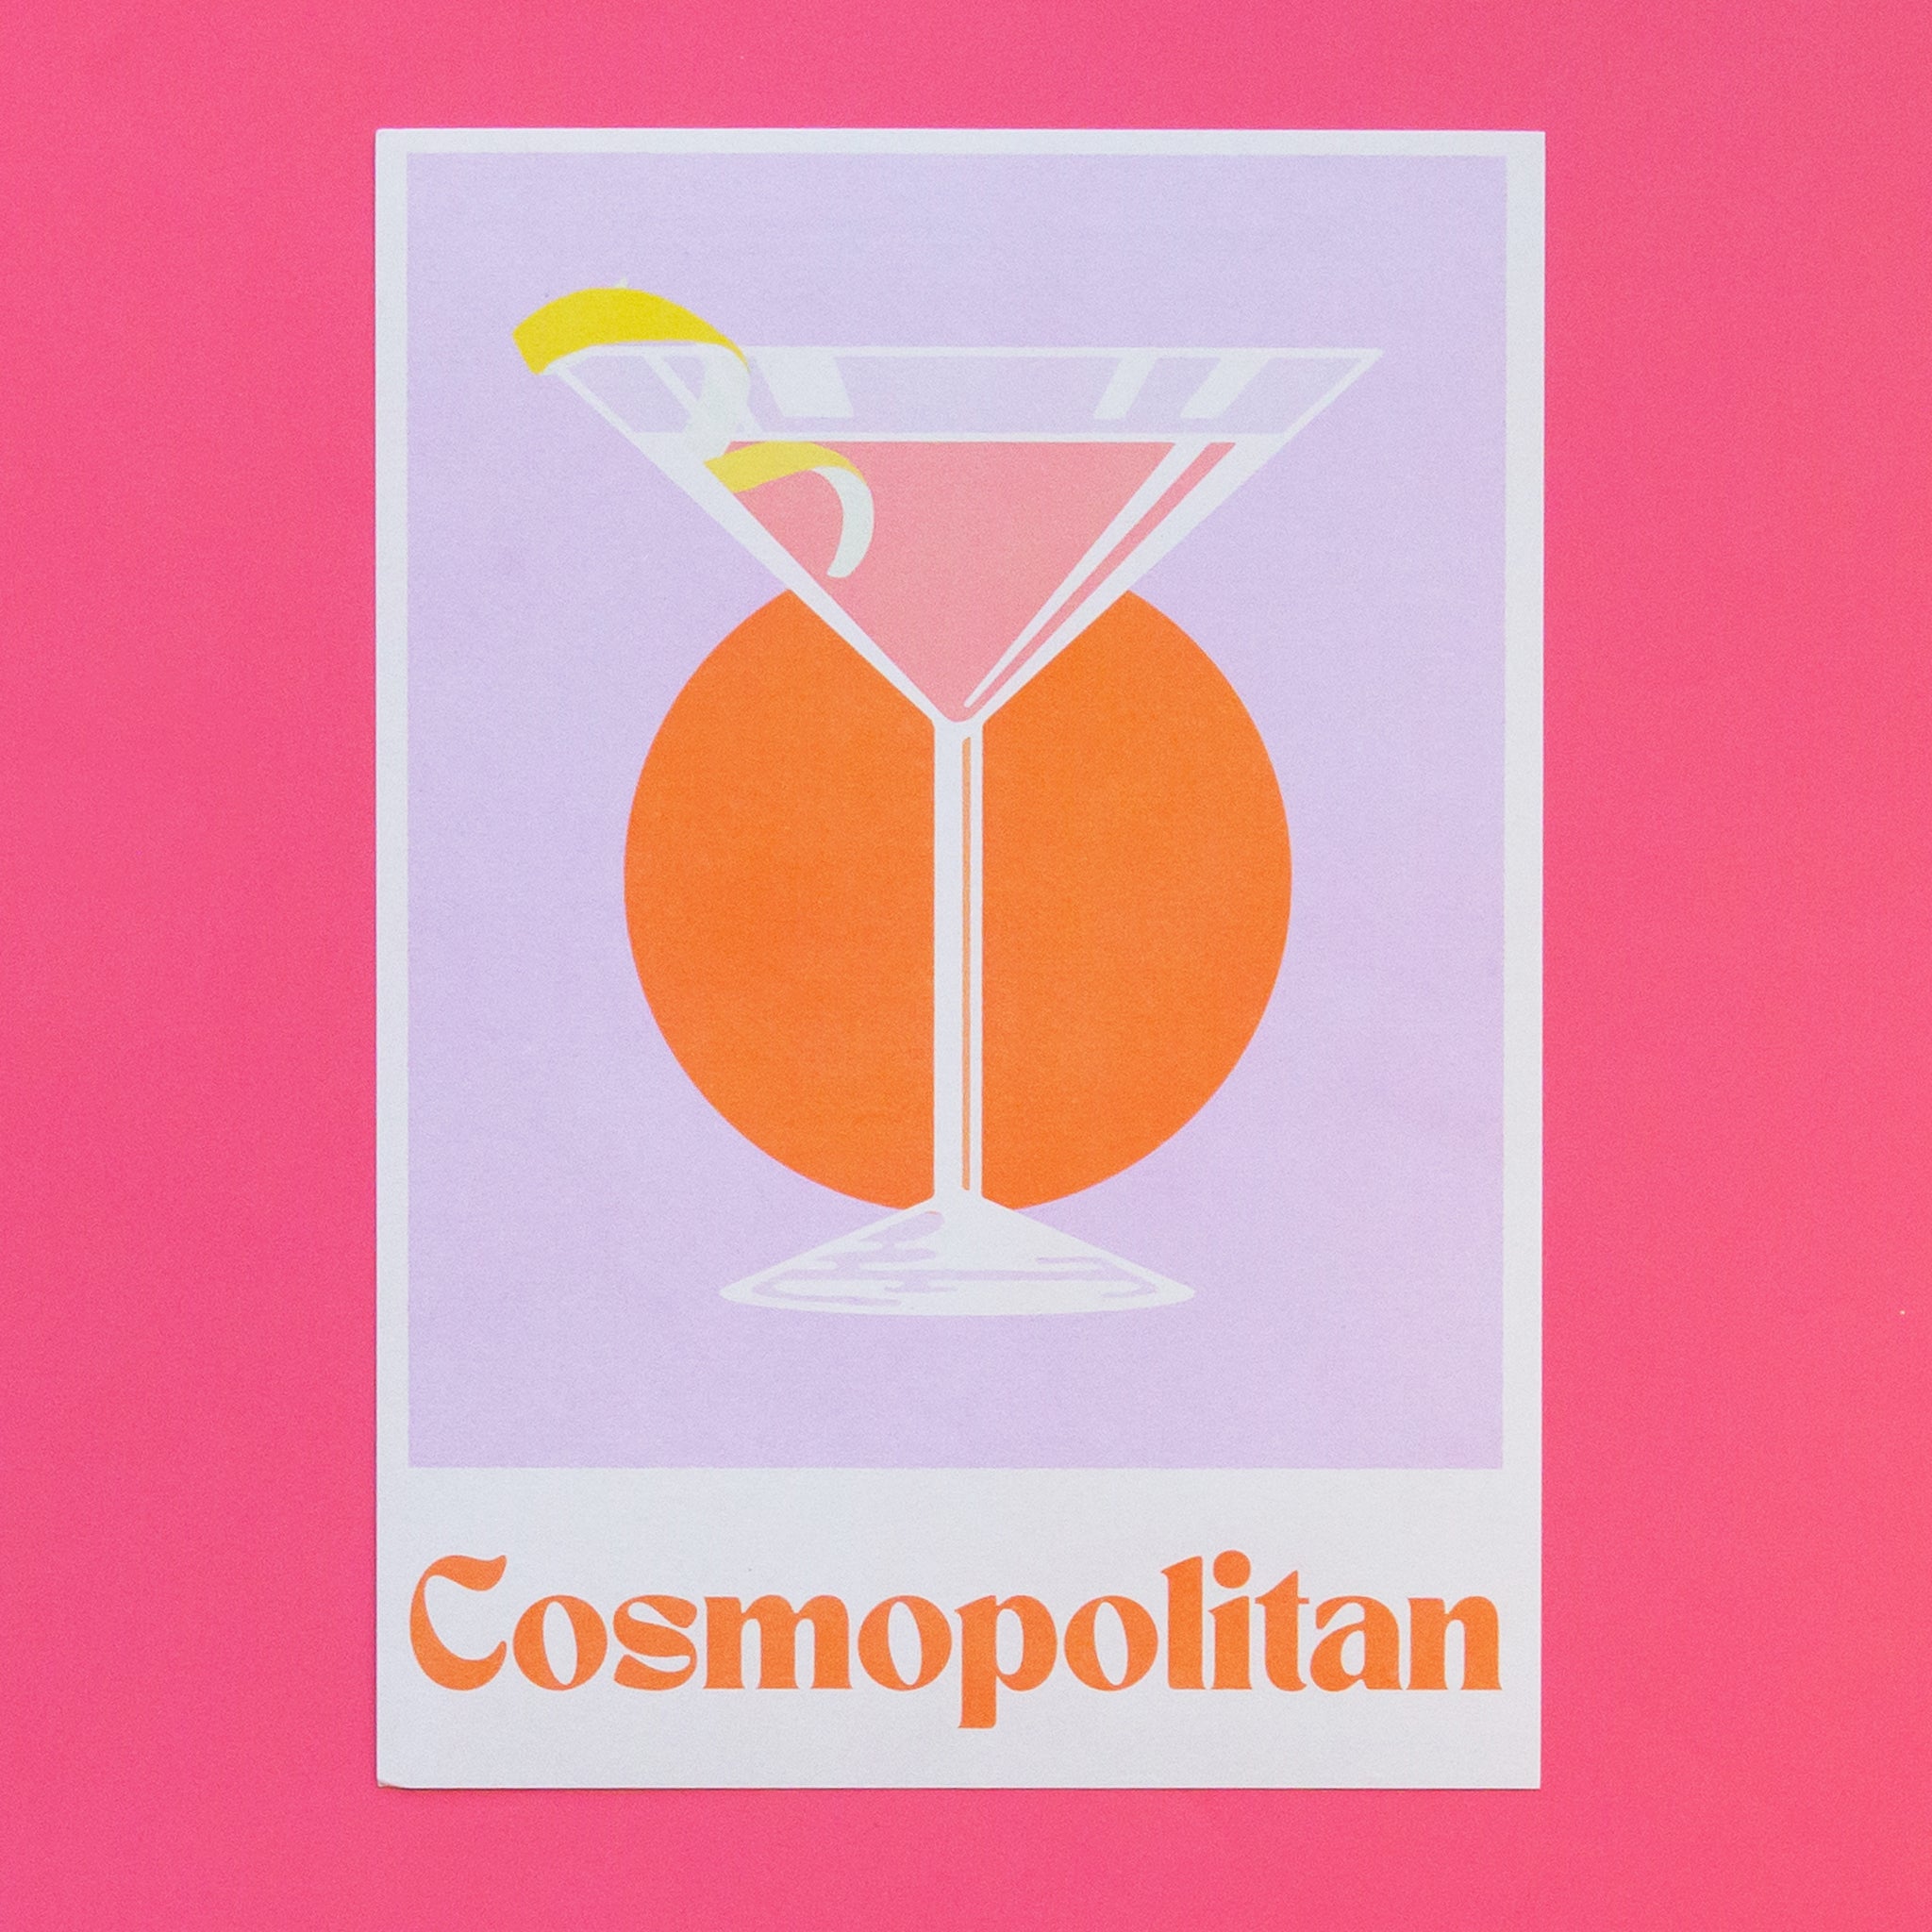 a cosmopolitan cocktail illustration with a lemon twist garnish sits on a purple background. text reads cosmopolitan